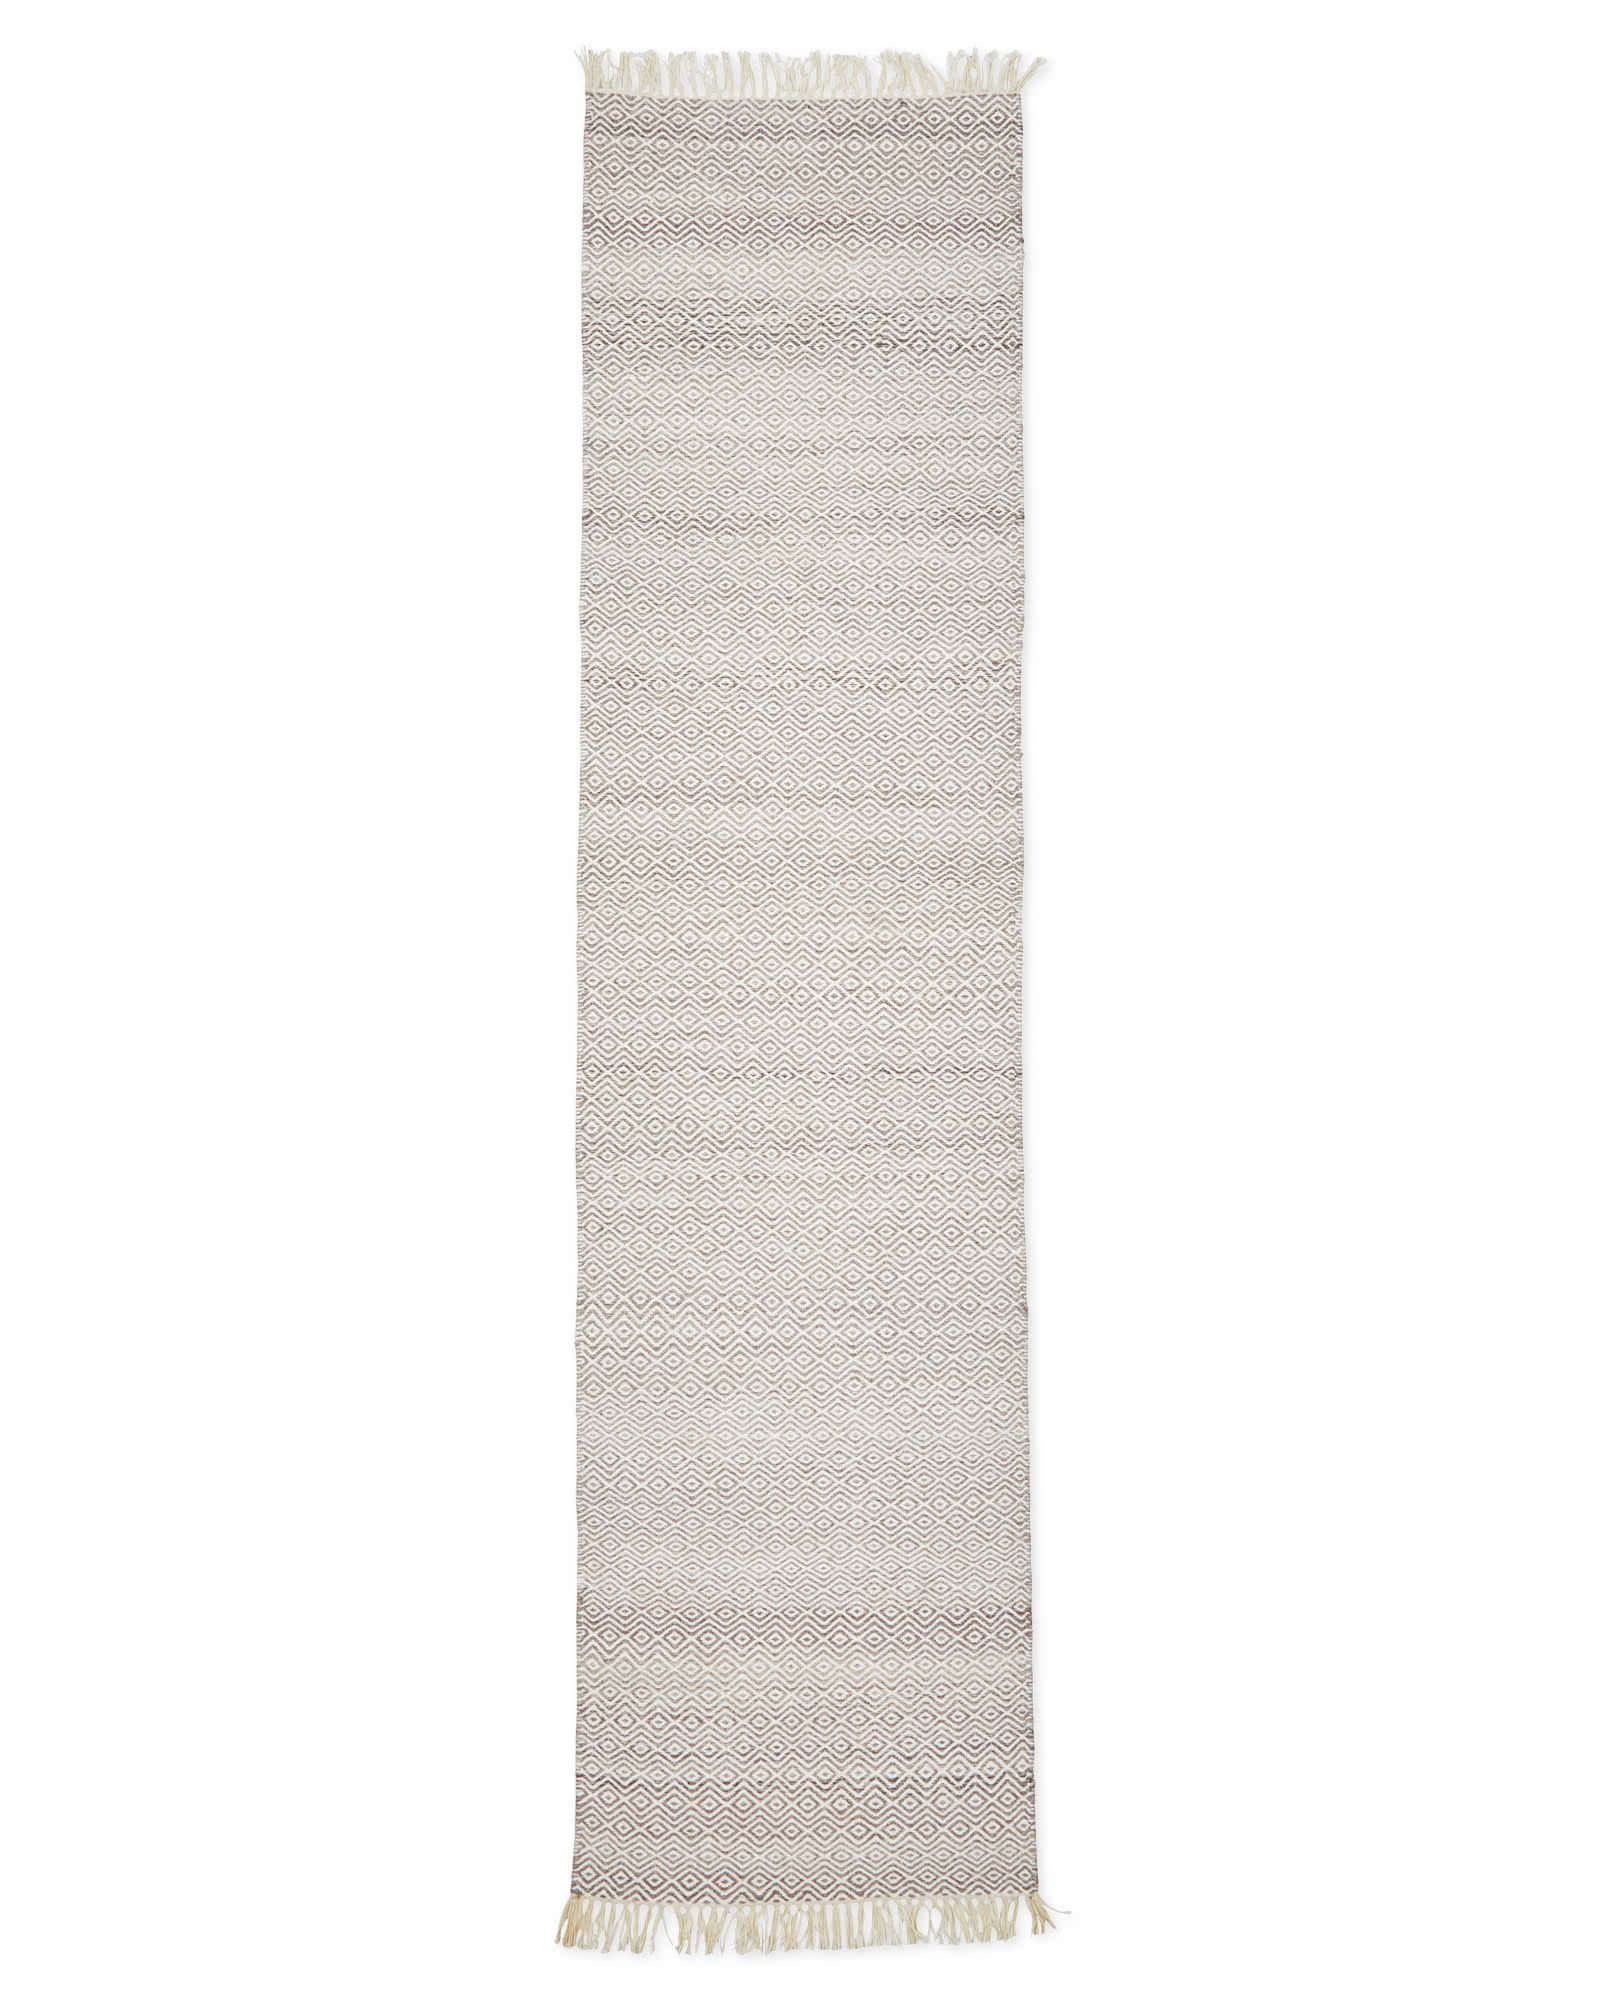 Seaview Rug | Serena and Lily